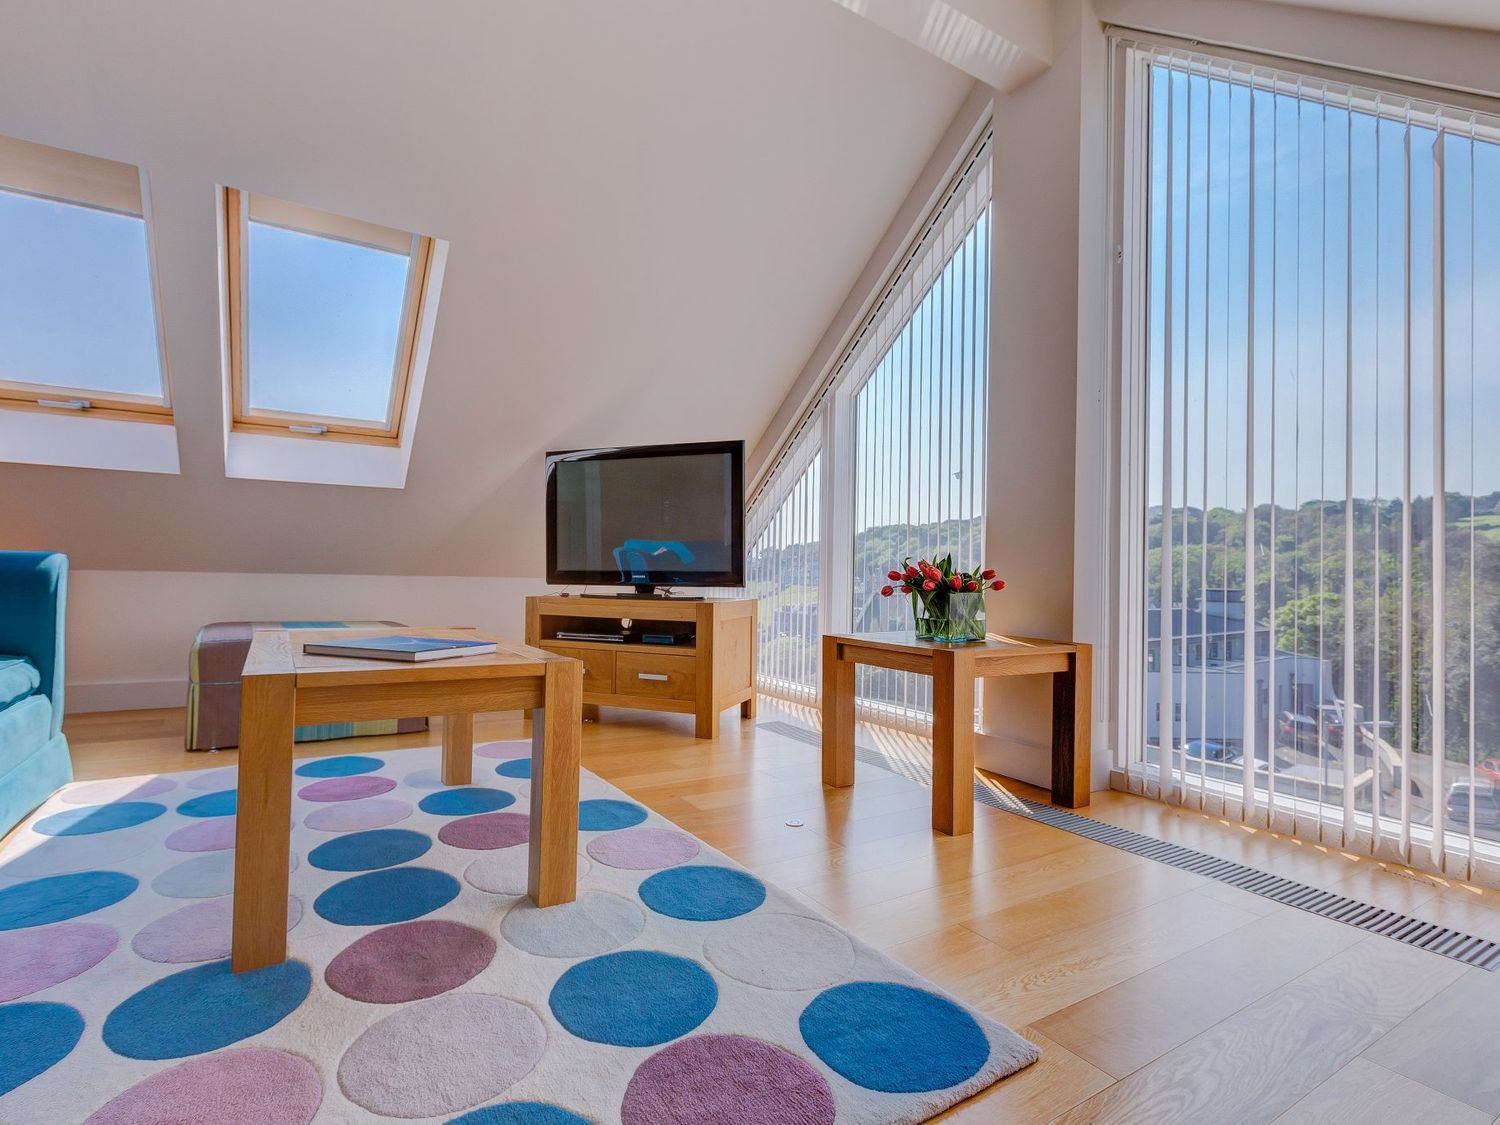 The Penthouse - Cornwall - 1073841 - photo 1